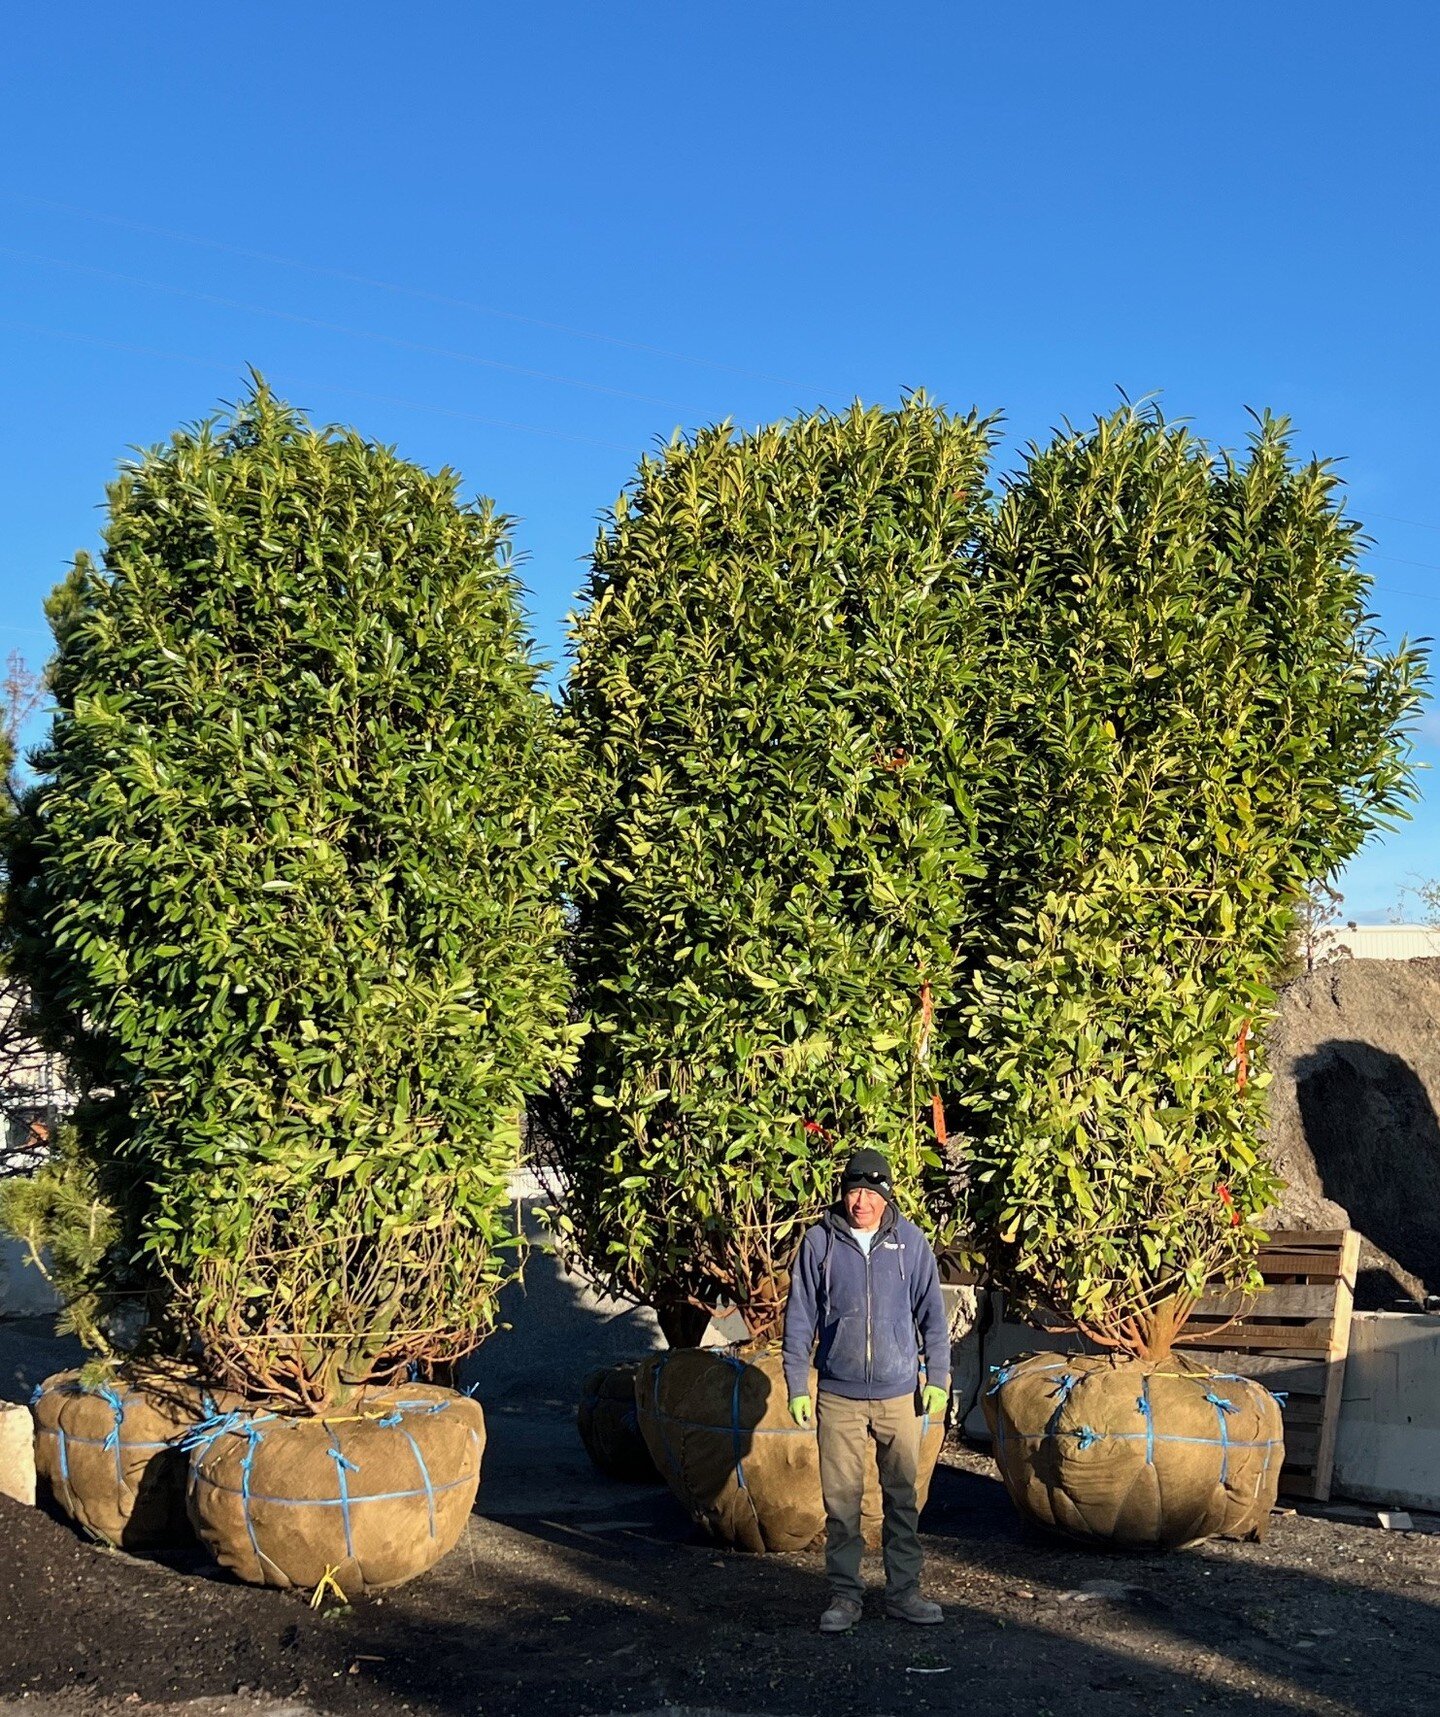 Our holding nursery is filling up quickly with trees and plants for our installation projects this year. These are some of the largest Schipkaensis Laurels we've ever gotten, and we're looking forward to seeing them planted in our client's yard soon!